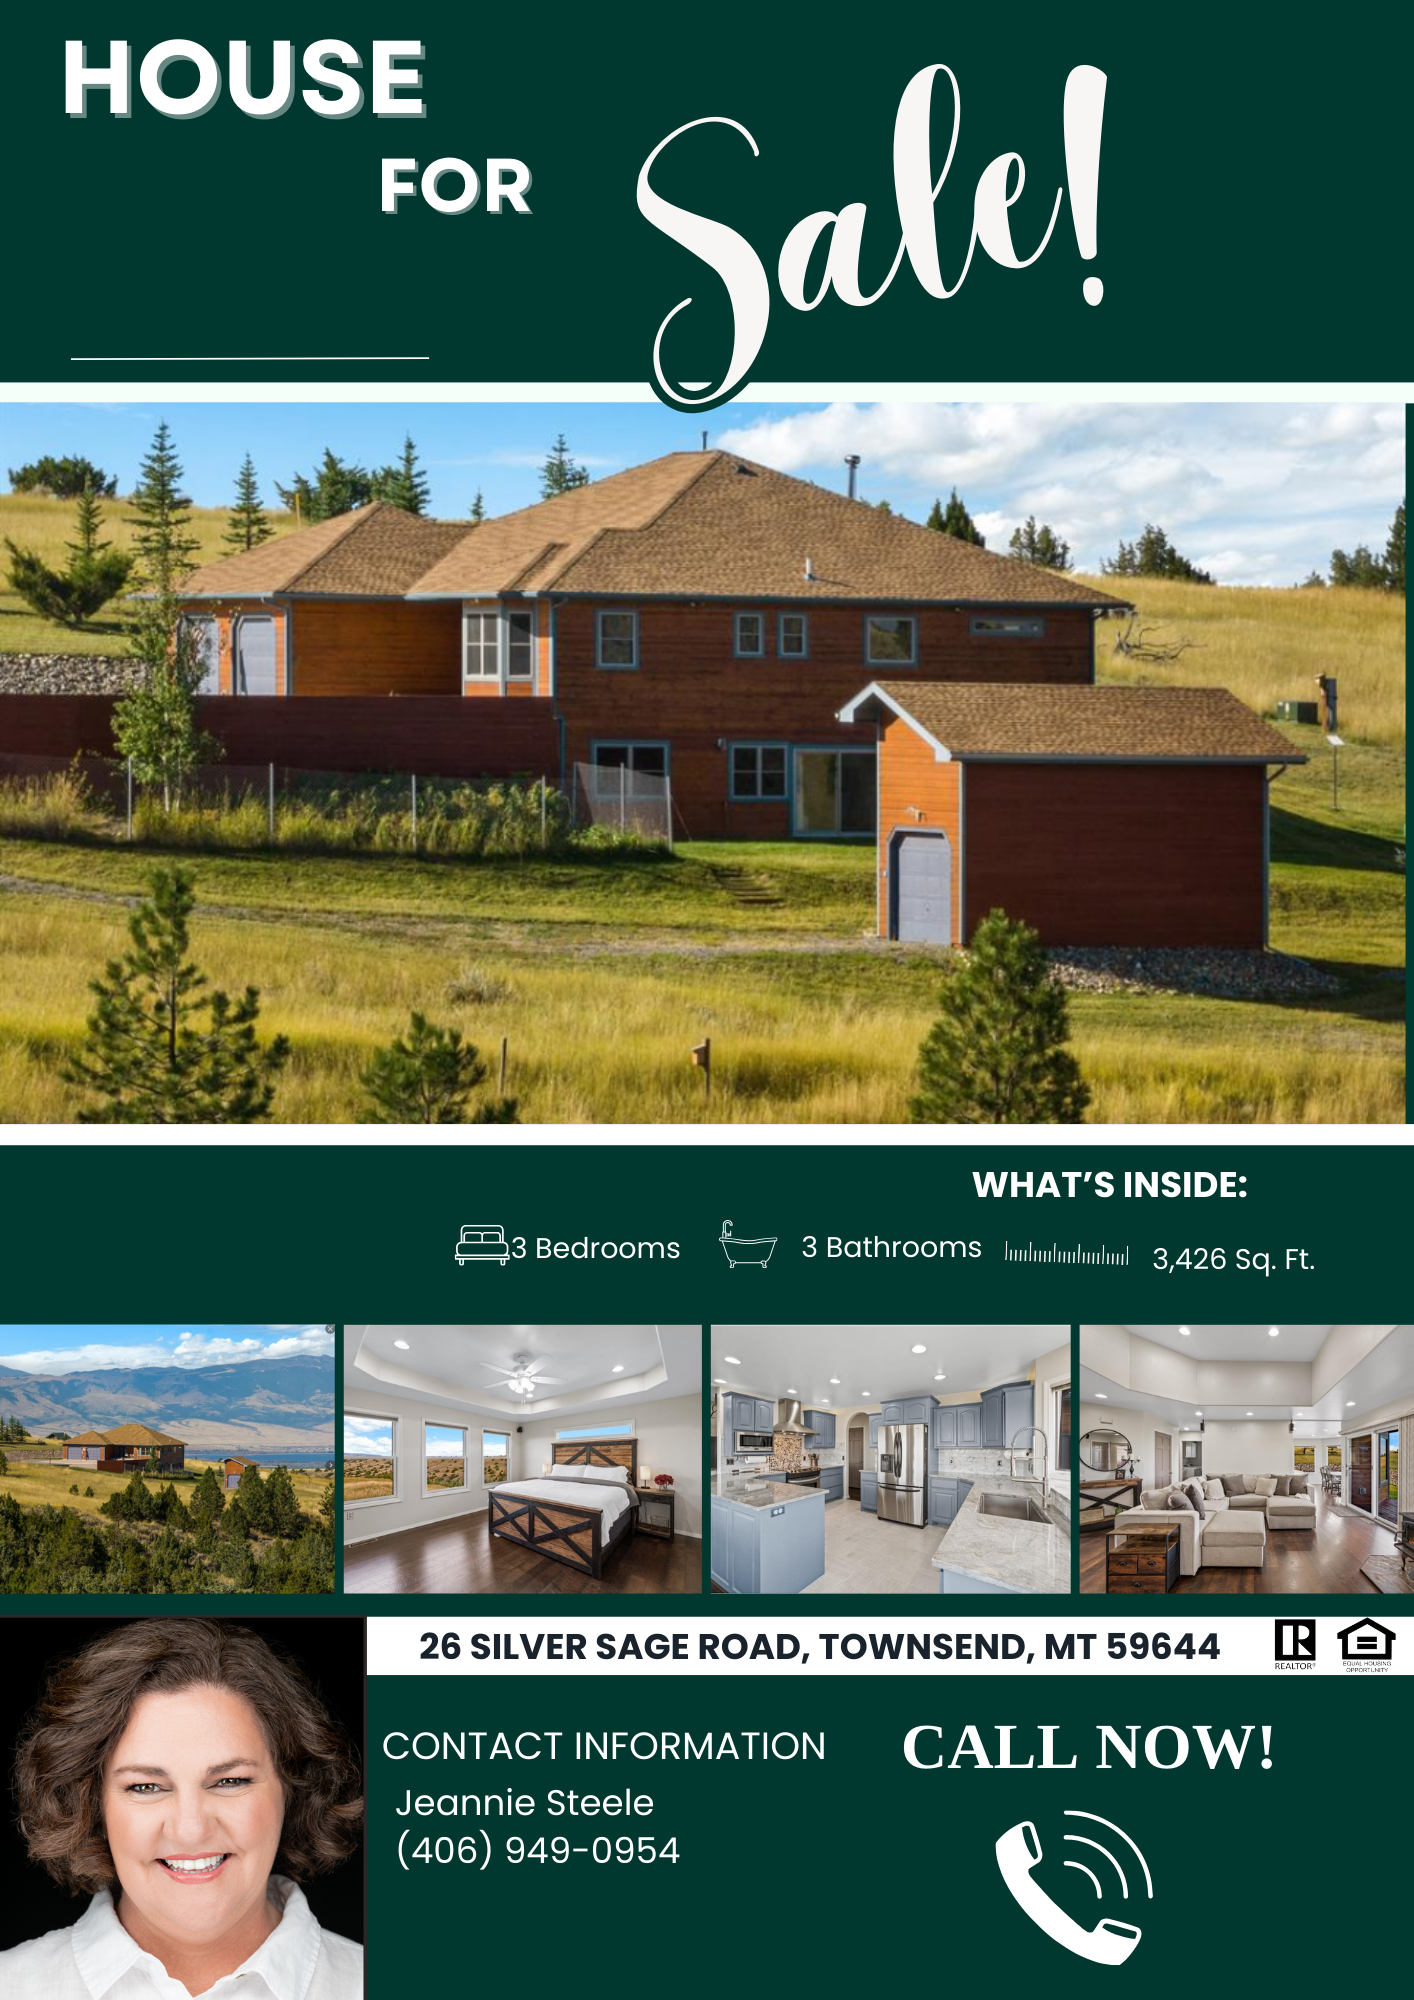 26 Silver Sage Road, Townsend, Montana